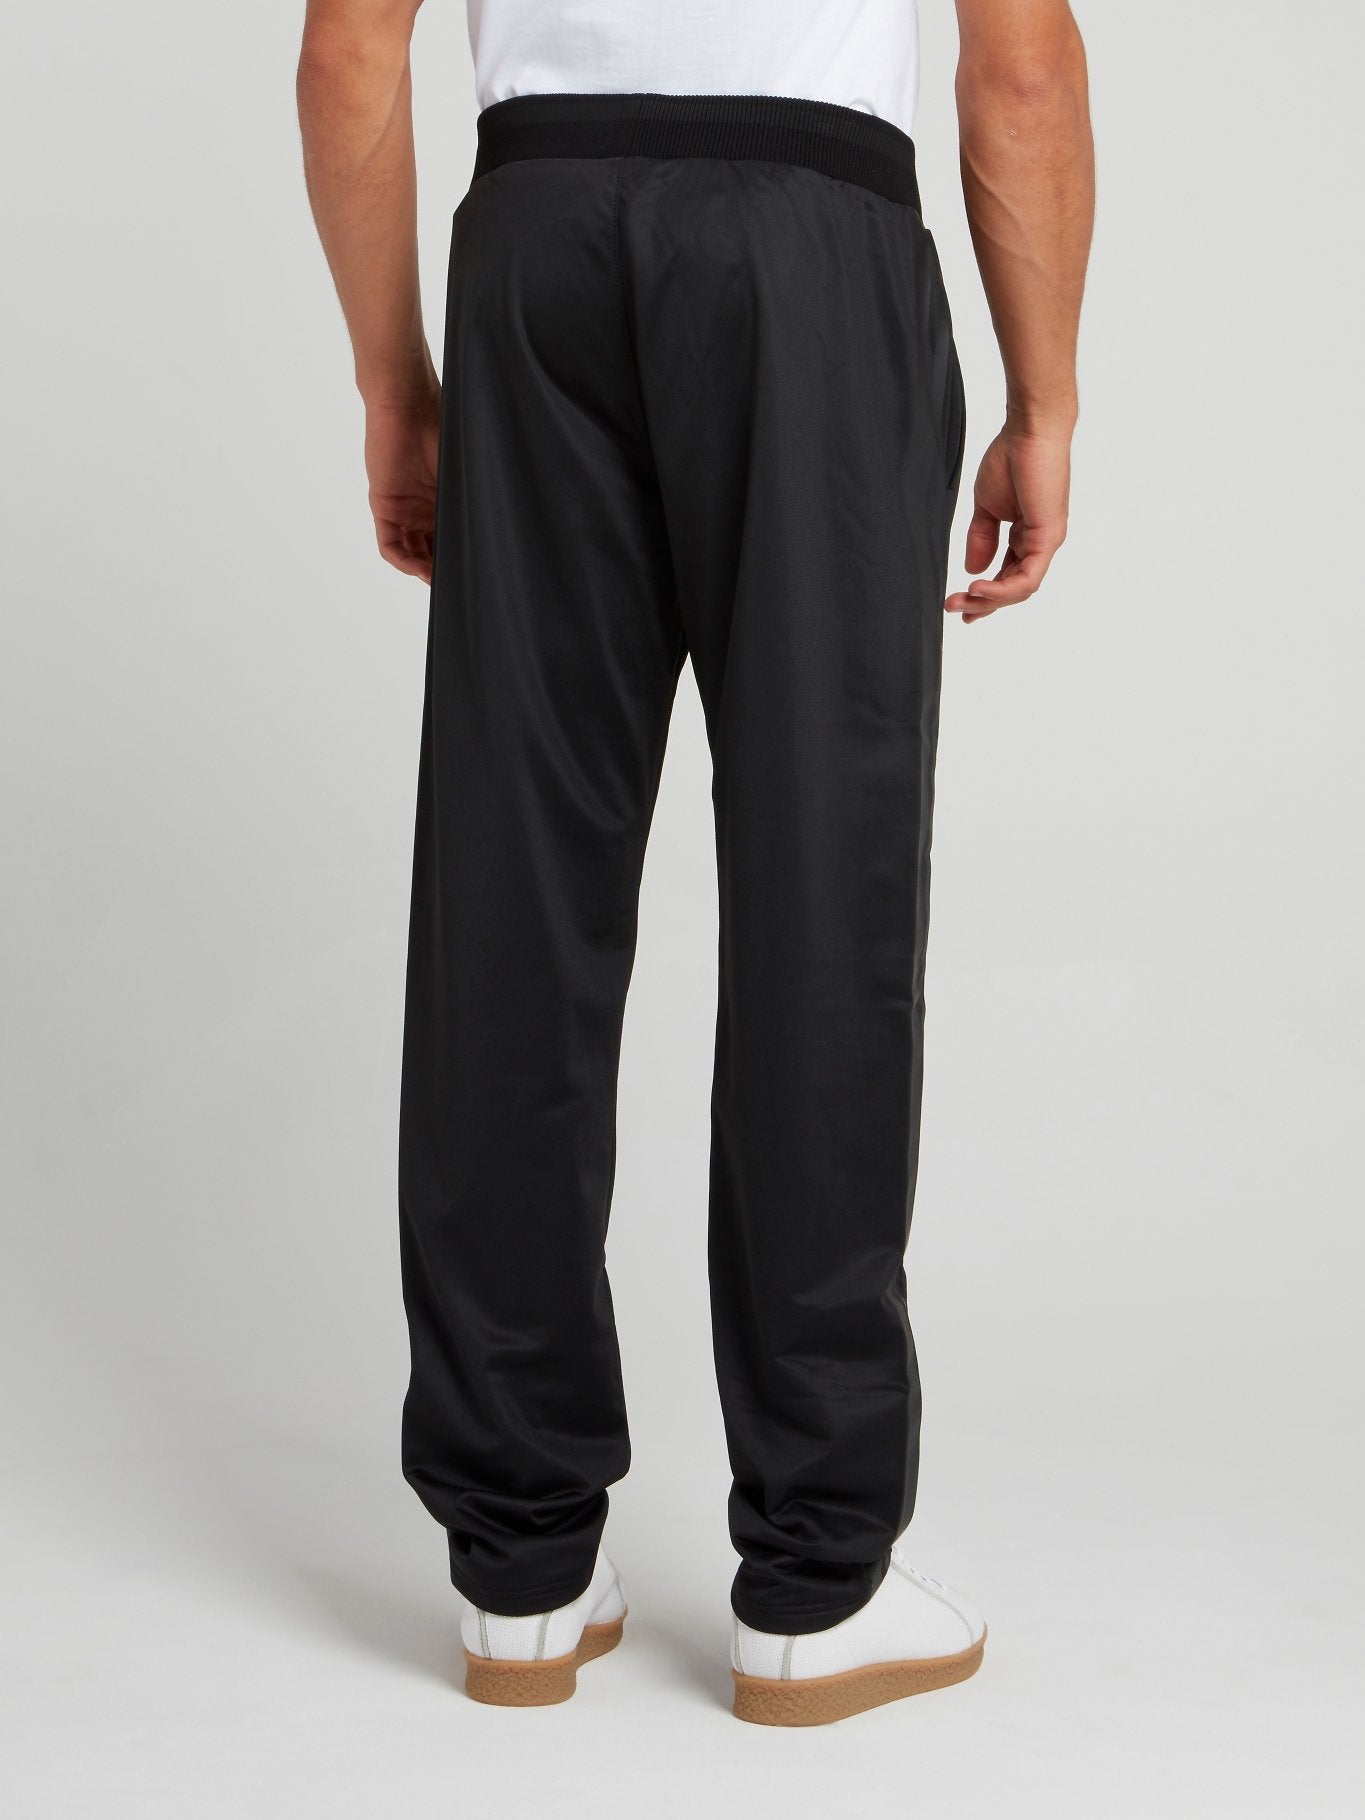 Black Side Stripe Active Trousers